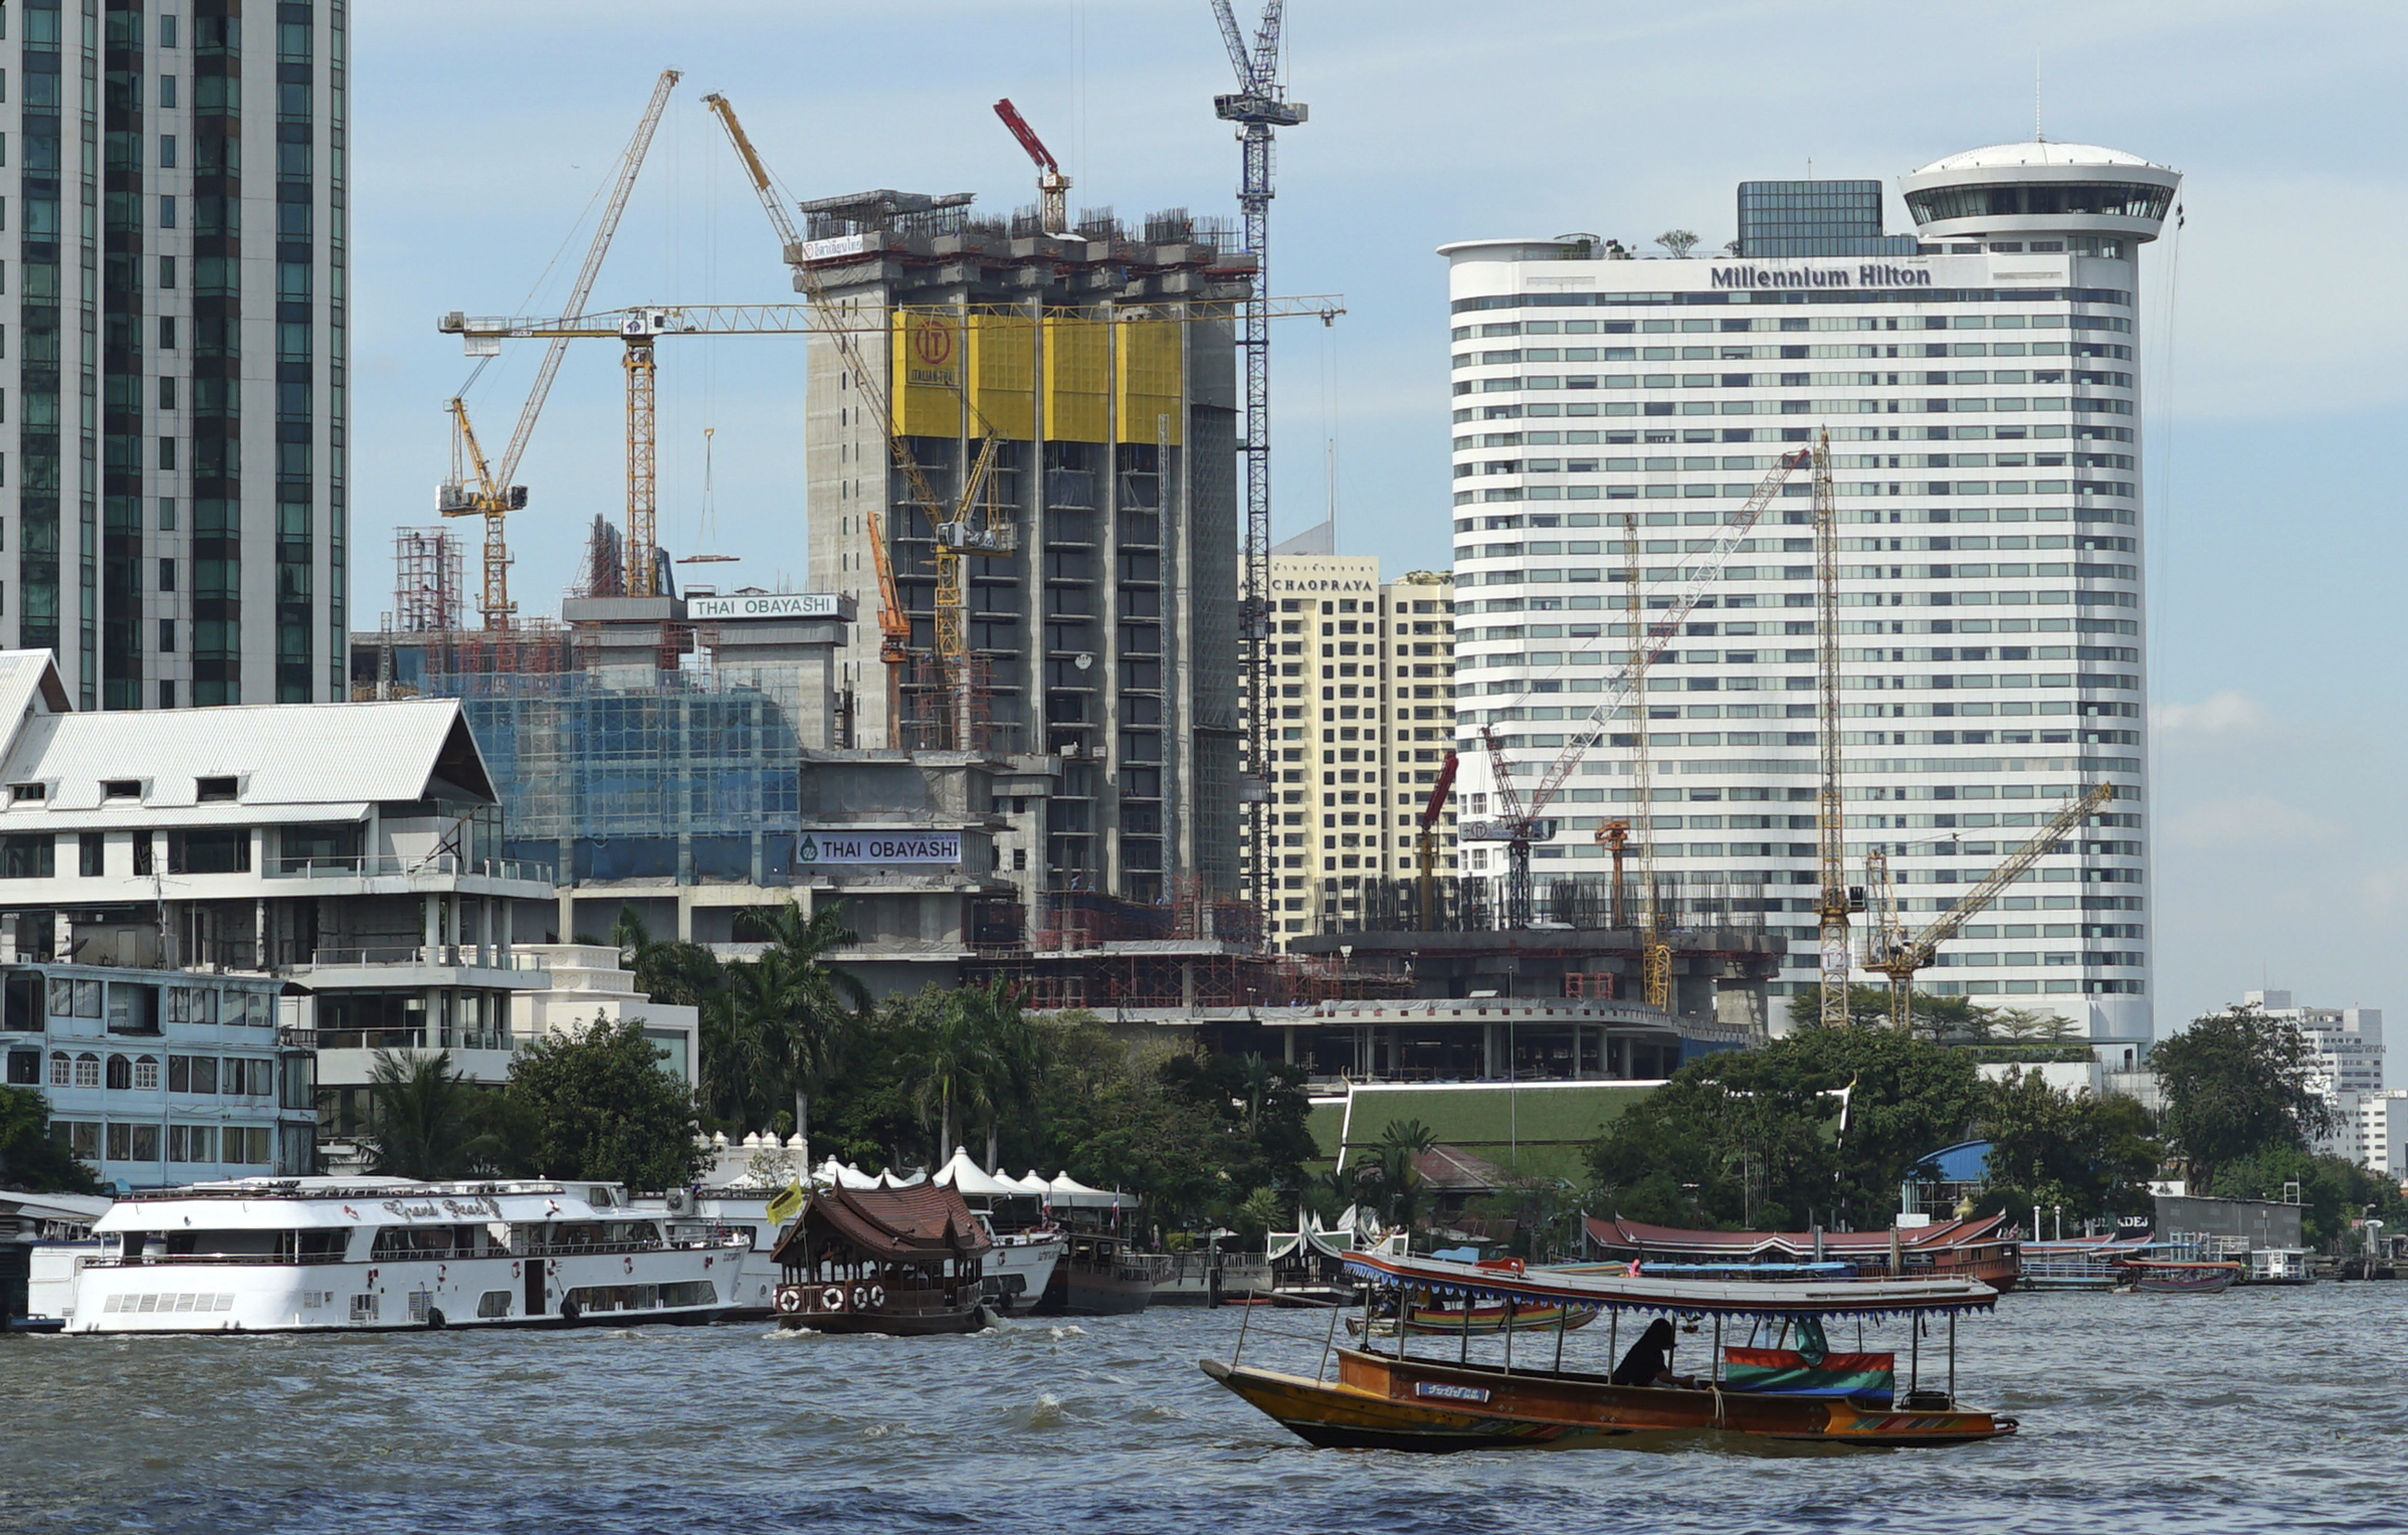 A riverboat taxi crosses the Chao Phraya River in front of massive construction projects Wednesday, Jan. 18, 2017, in Bangkok. A United Nations report says Asia's economic outlook for 2017 is strong despite slowing global growth due to sluggish international trade and investment. (AP Photo/Dake Kang)